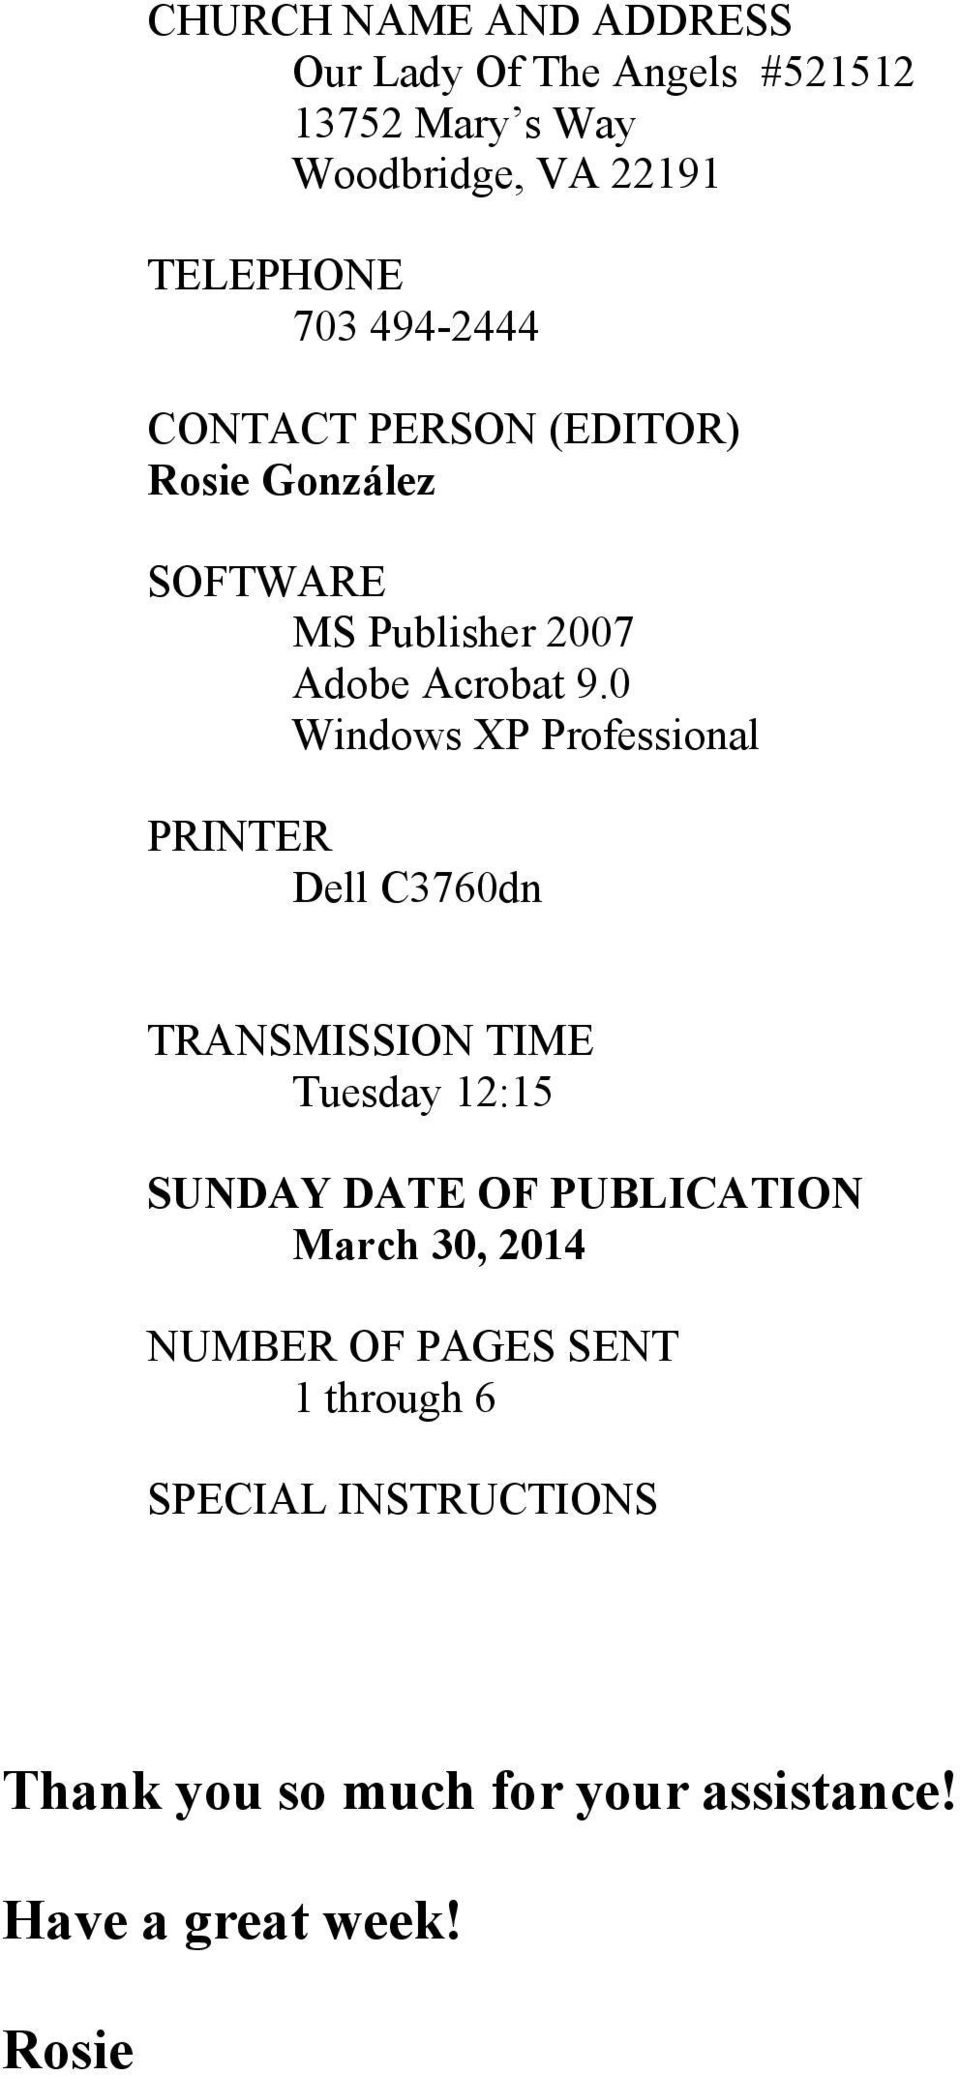 0 Windows XP Professional PRINTER Dell C3760dn TRANSMISSION TIME Tuesday 12:15 SUNDAY DATE OF PUBLICATION